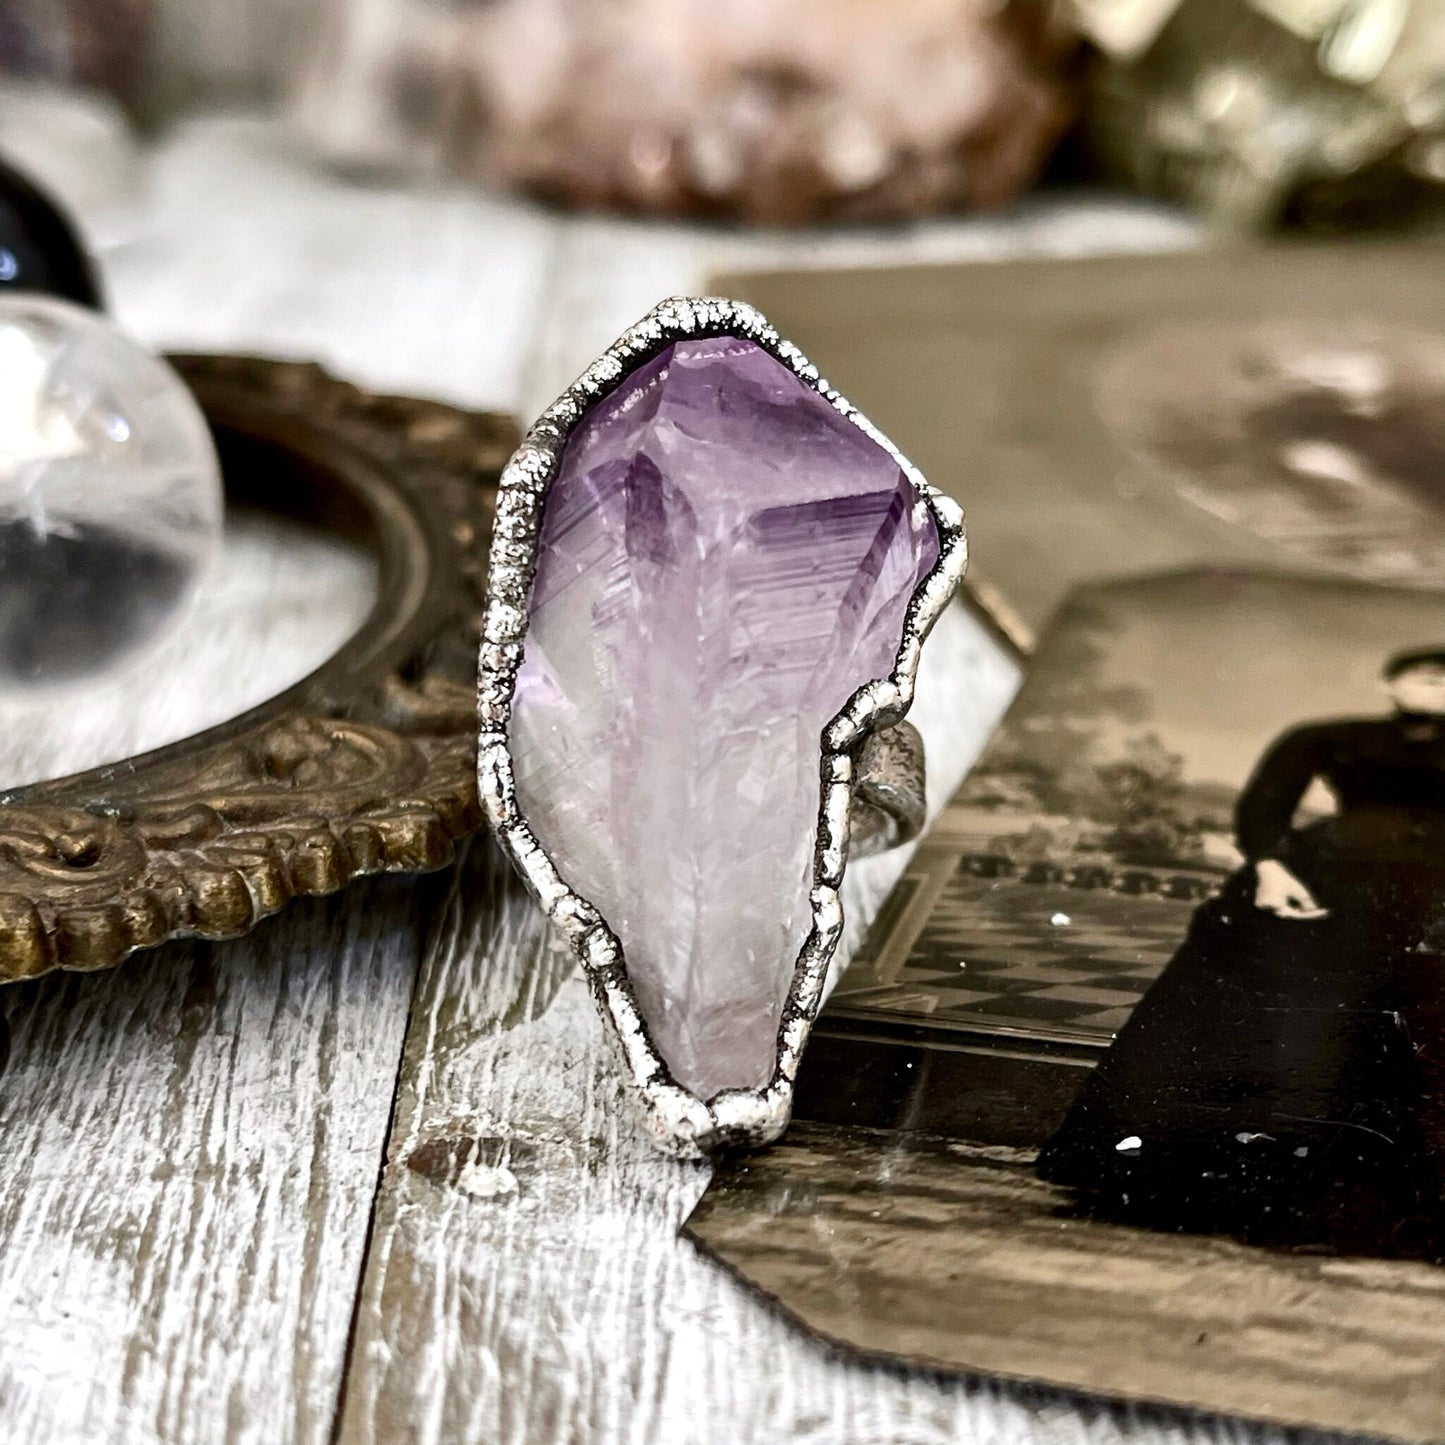 Size 6 Big Raw Amethyst Purple Crystal Ring in Fine Silver / Foxlark Collection - One of a Kind